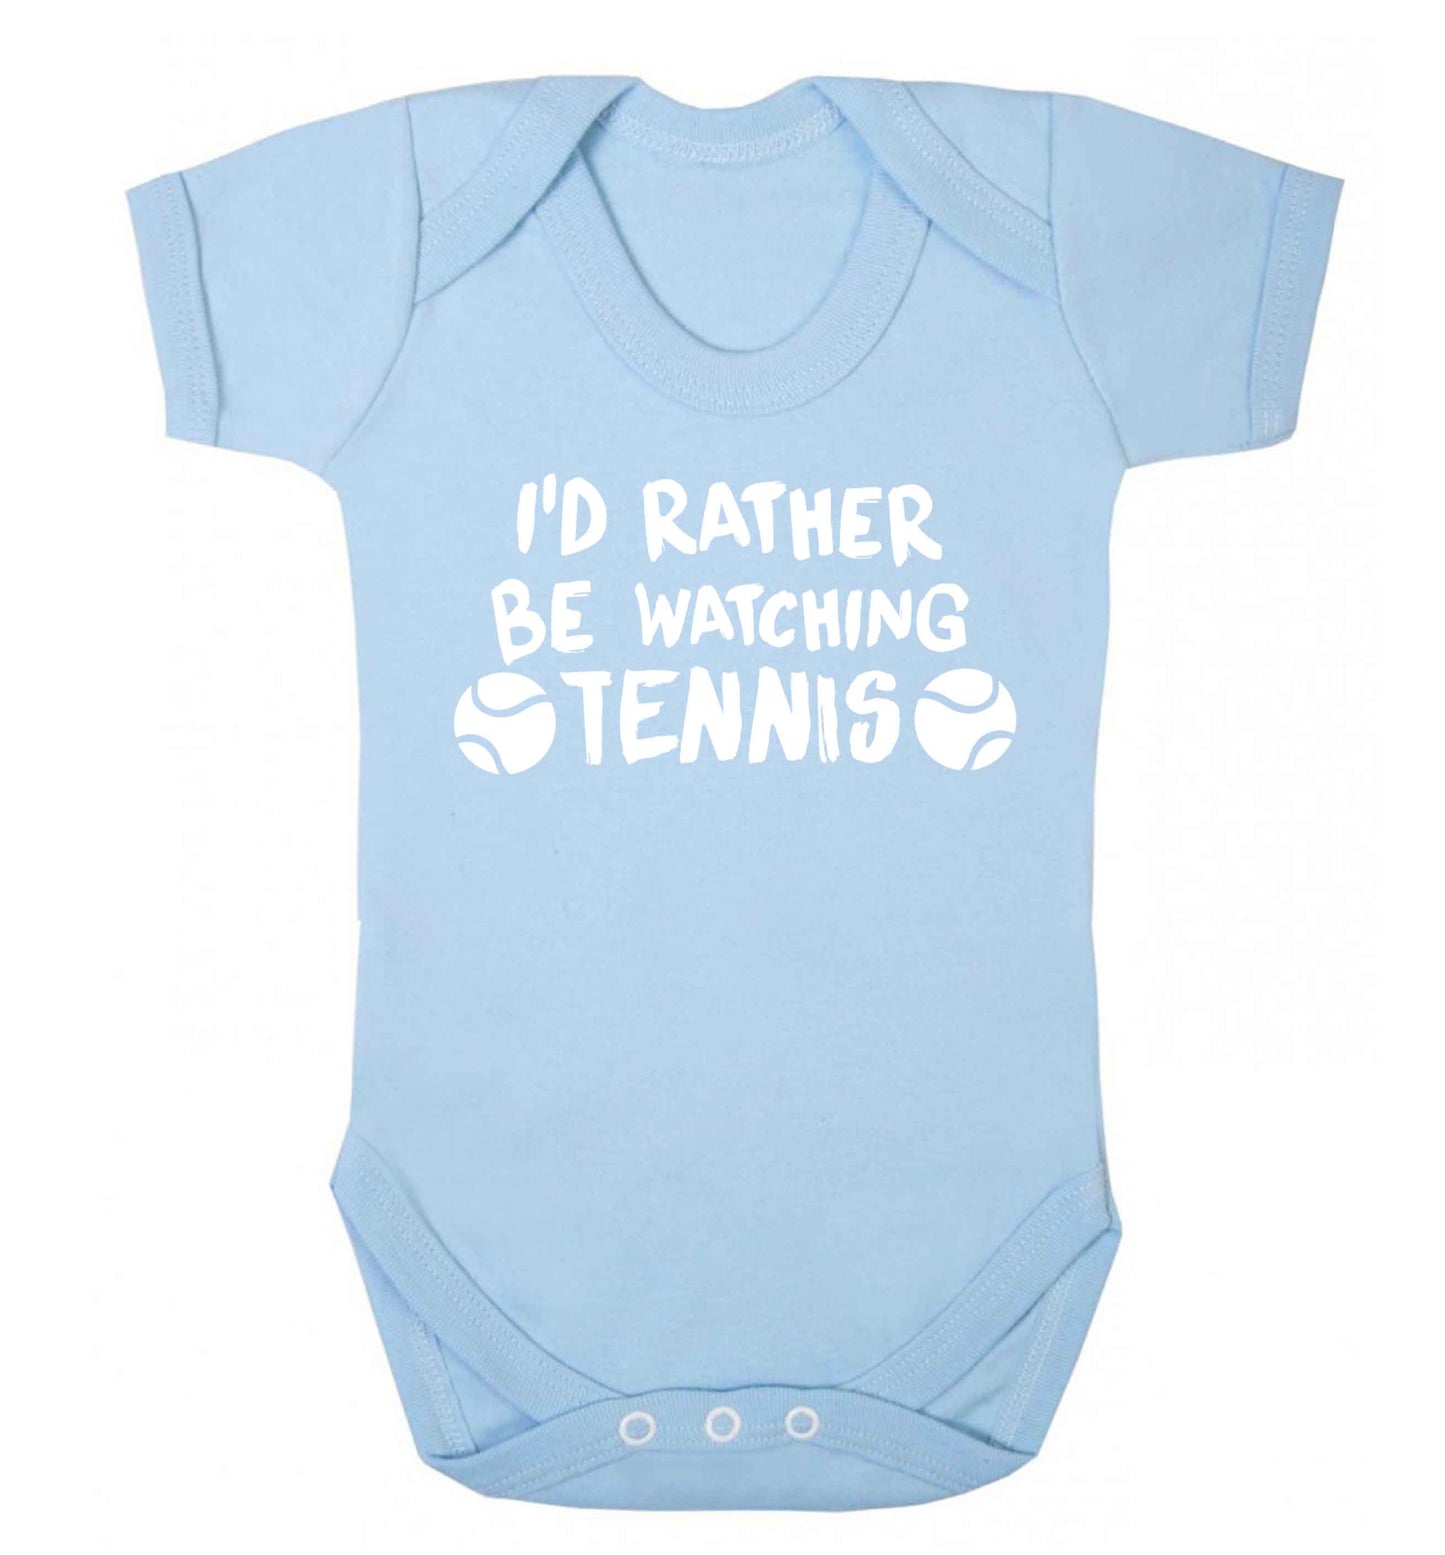 I'd rather be watching the tennis Baby Vest pale blue 18-24 months